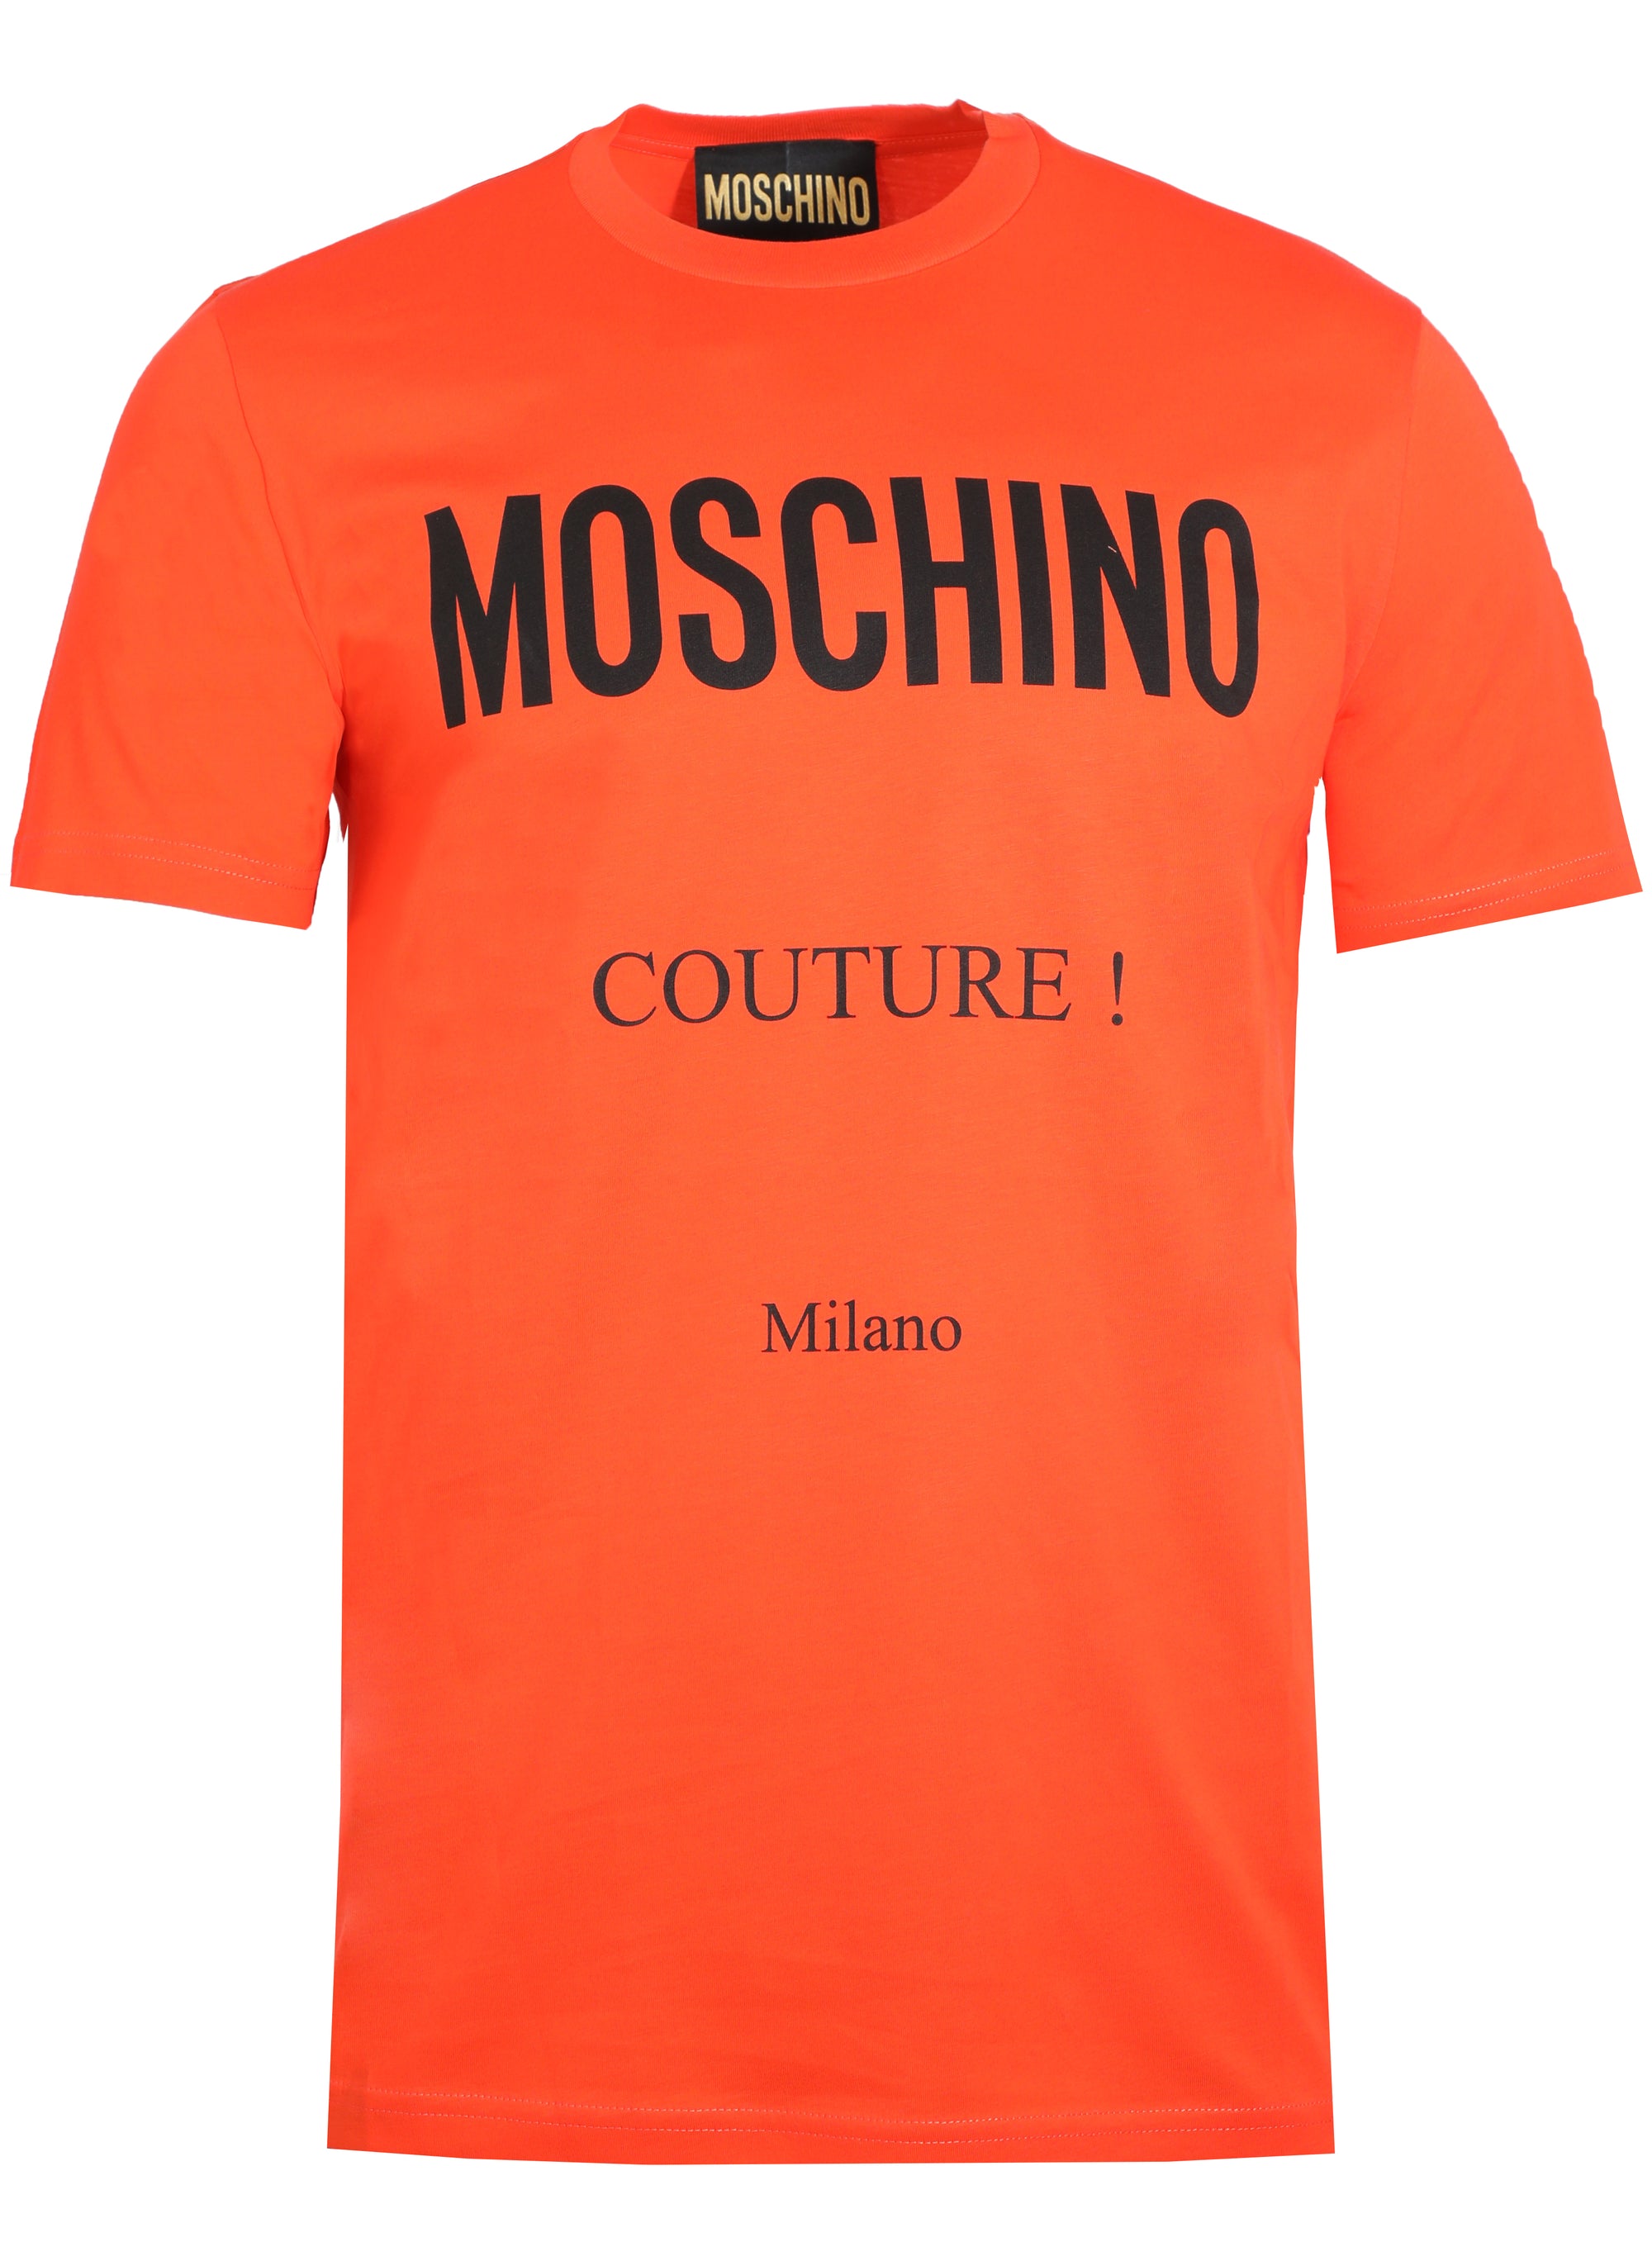 COTTON T-SHIRT WITH MOSCHINO COUTURE PRINT - ORANGE